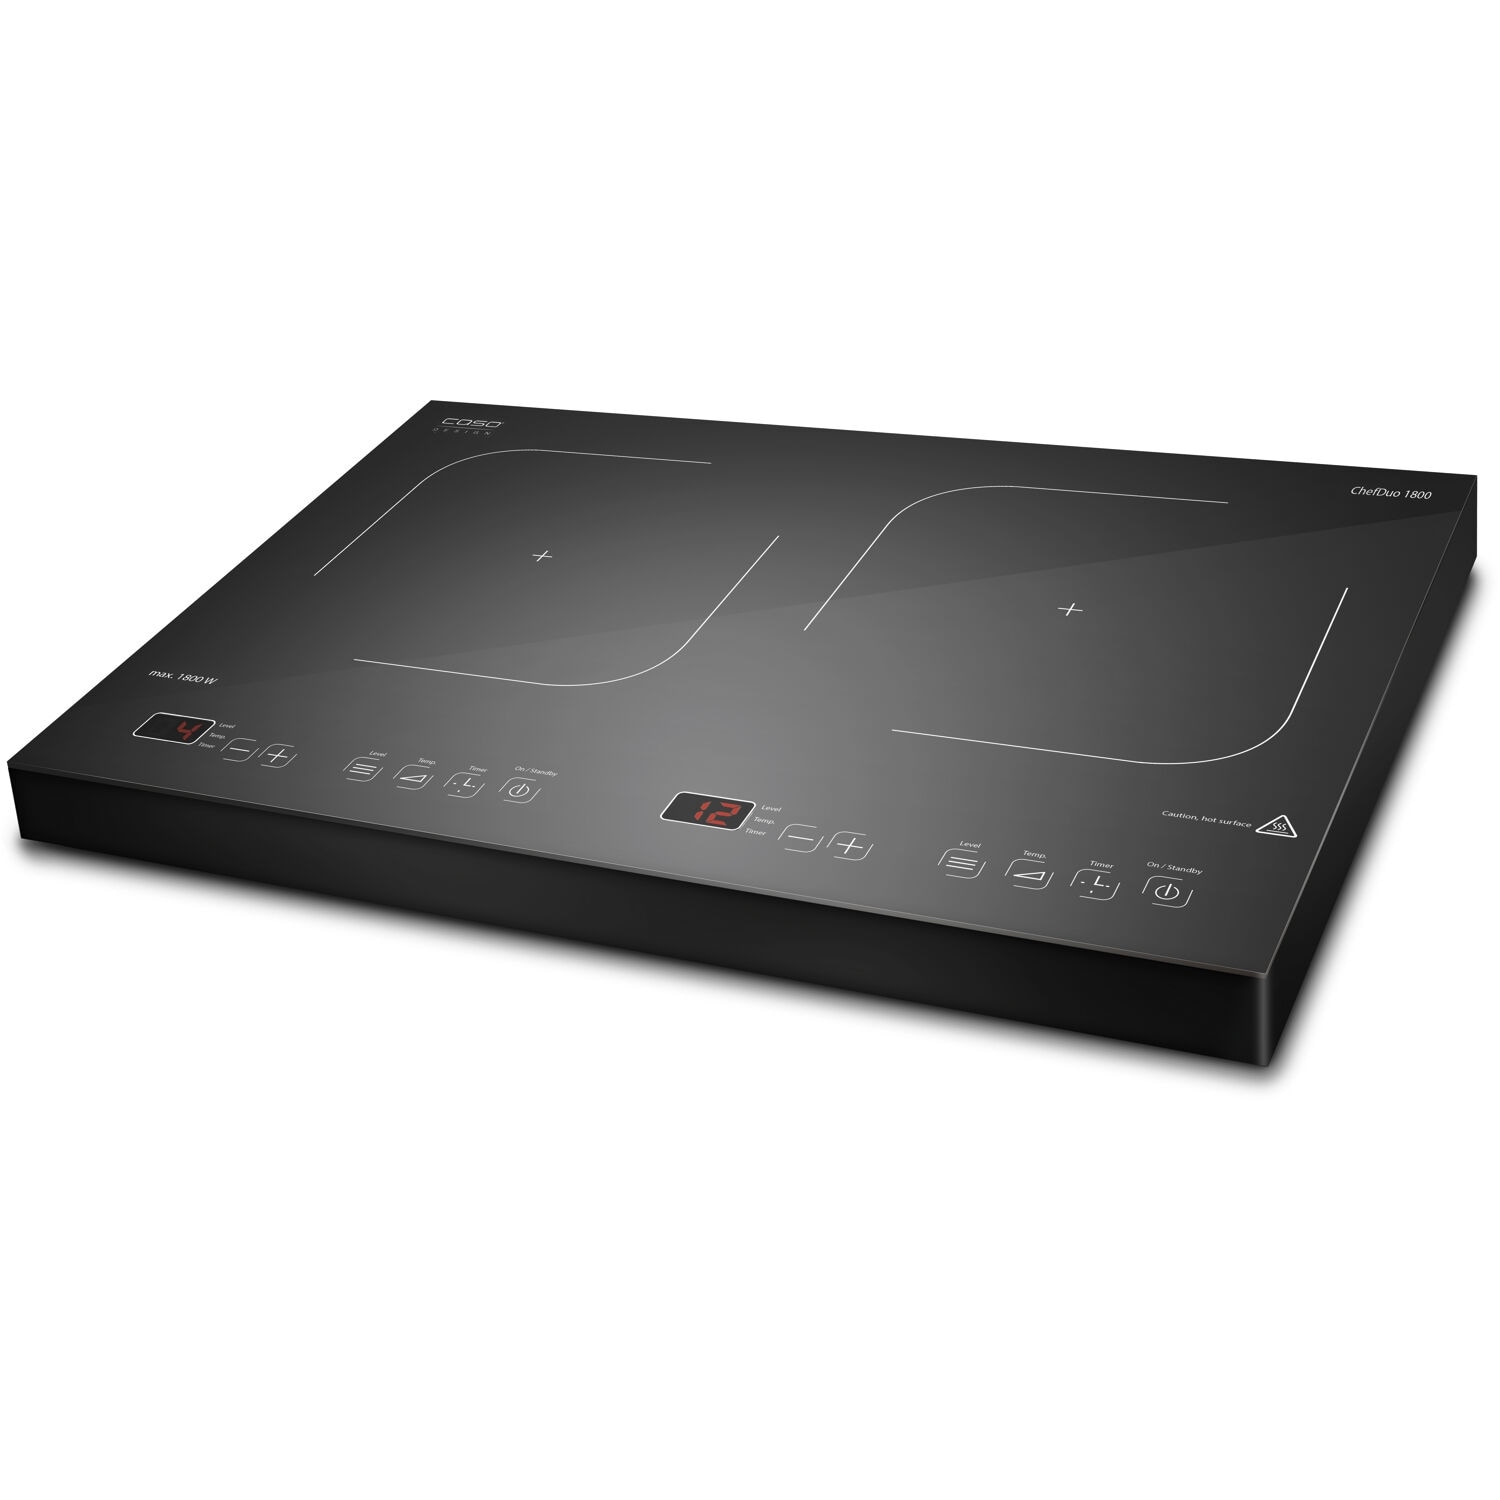 Caso Design Chef Duo Portable Double Induction Cooker ,Black